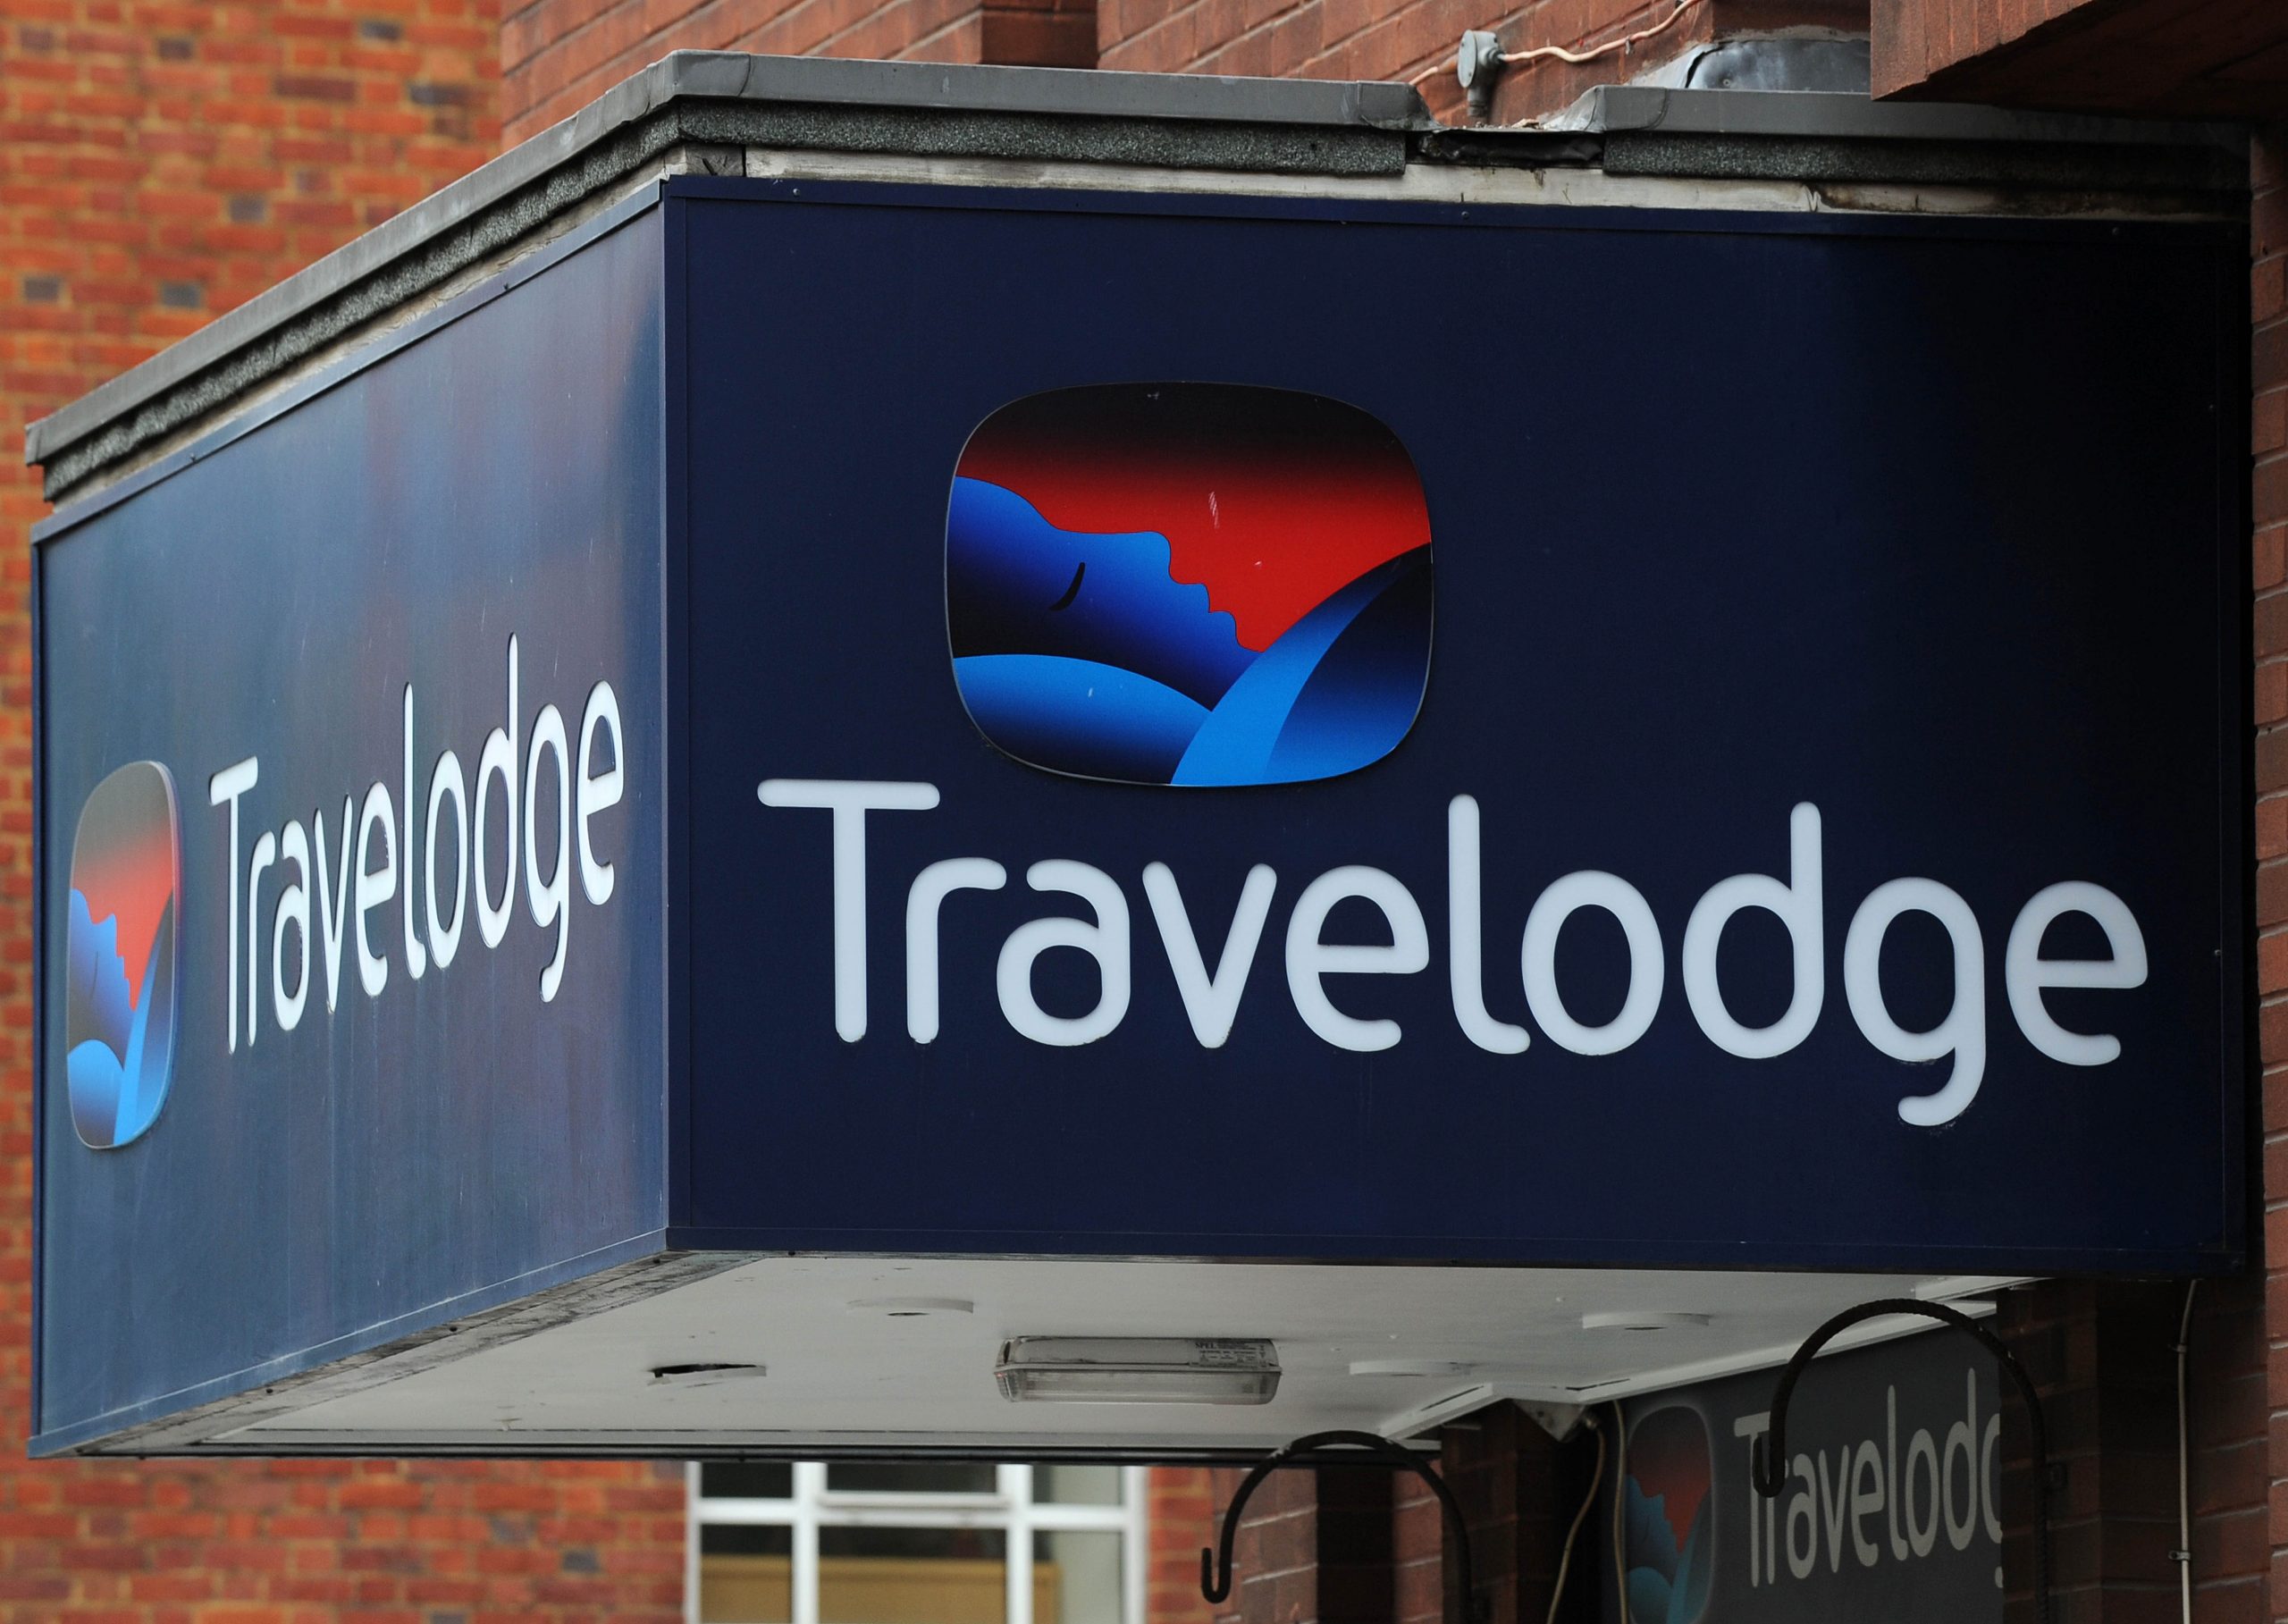 Travelodge budget hotel chain plans major expansion across Spain